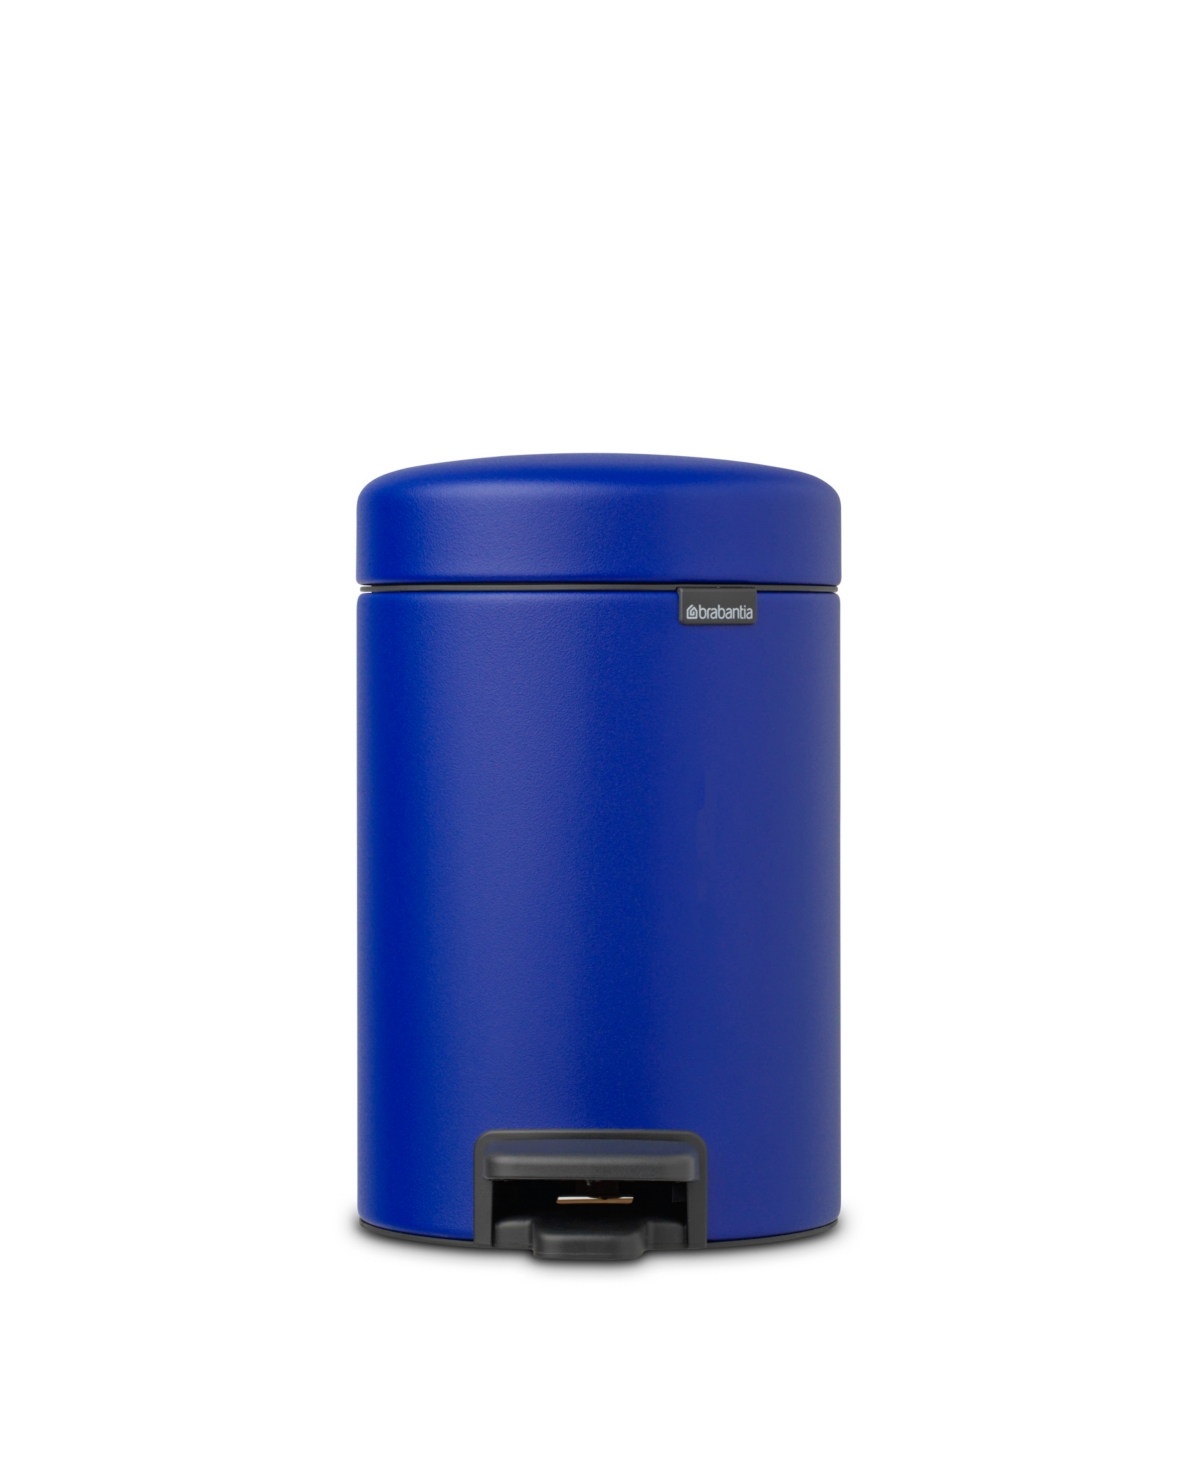 Brabantia New Icon Step On Trash Can, 0.8 Gallon, 3 Liter In Mineral Powerful Blue